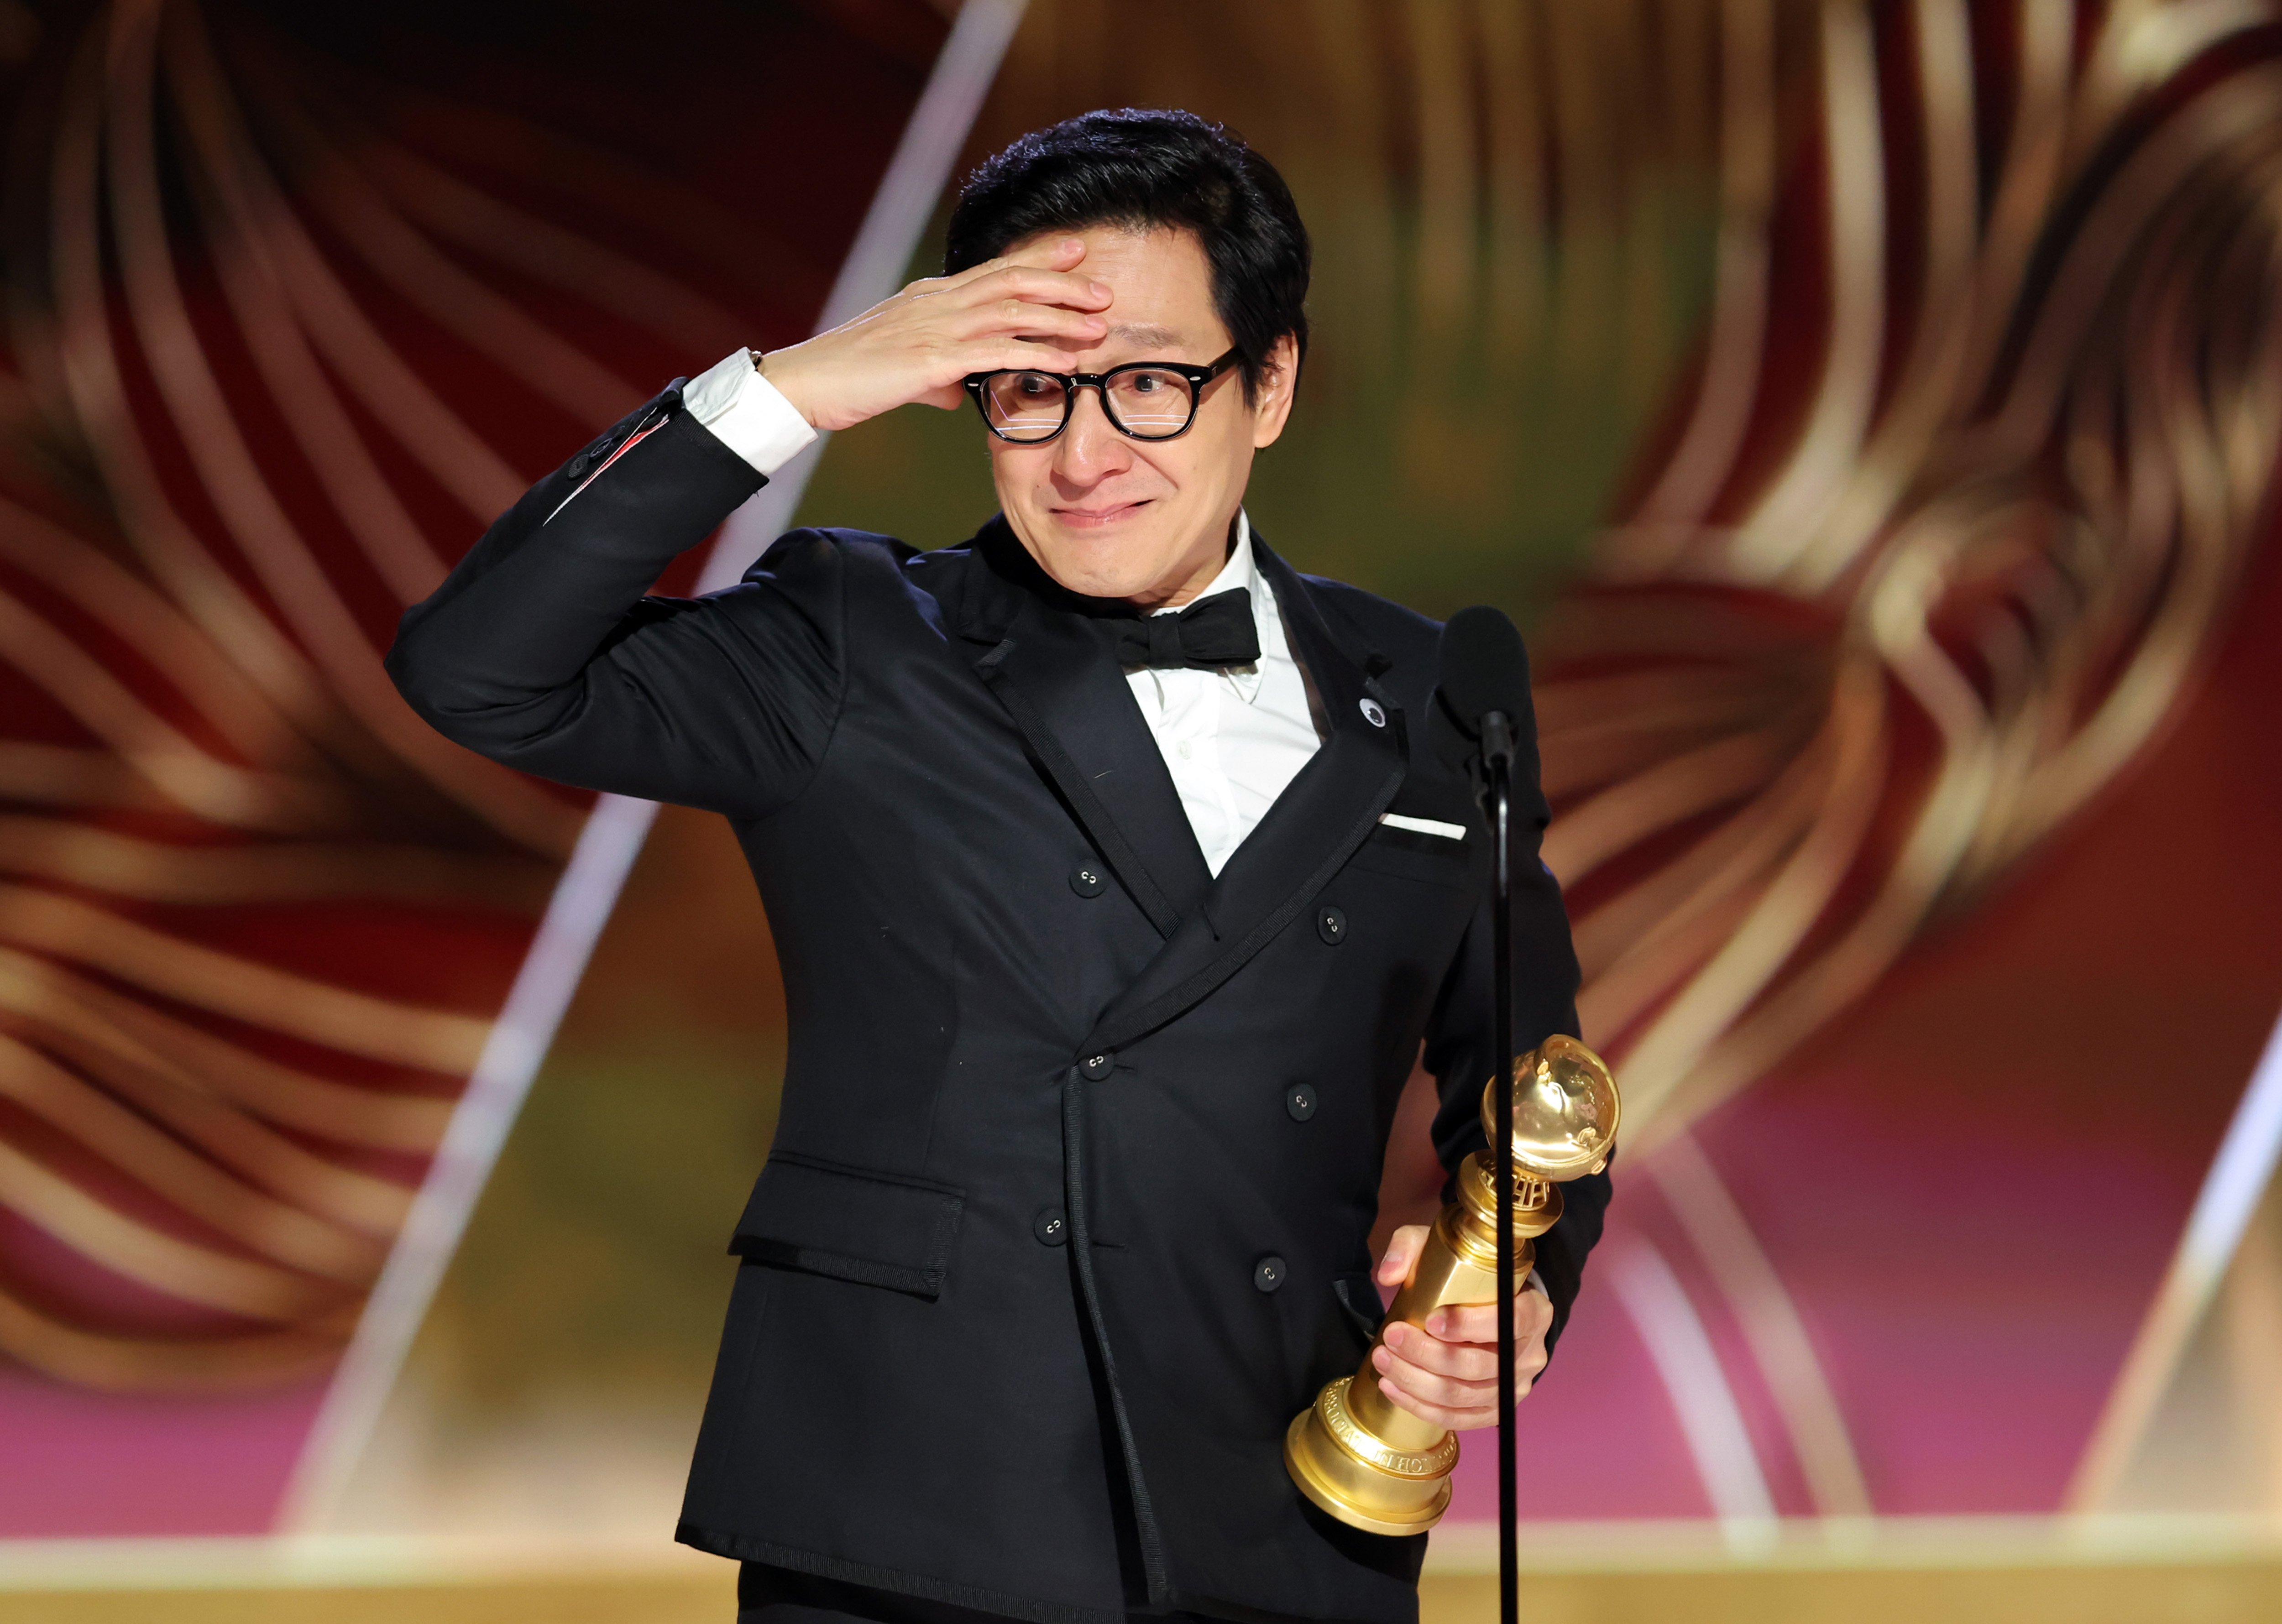 Ke Huy Quan after winning Best Supporting Actor for "Everything Everywhere All at Once" at the 80th annual Golden Globe Awards at The Beverly Hilton hotel in Beverly Hills, California, on January 10, 2023. | Source: Getty Images